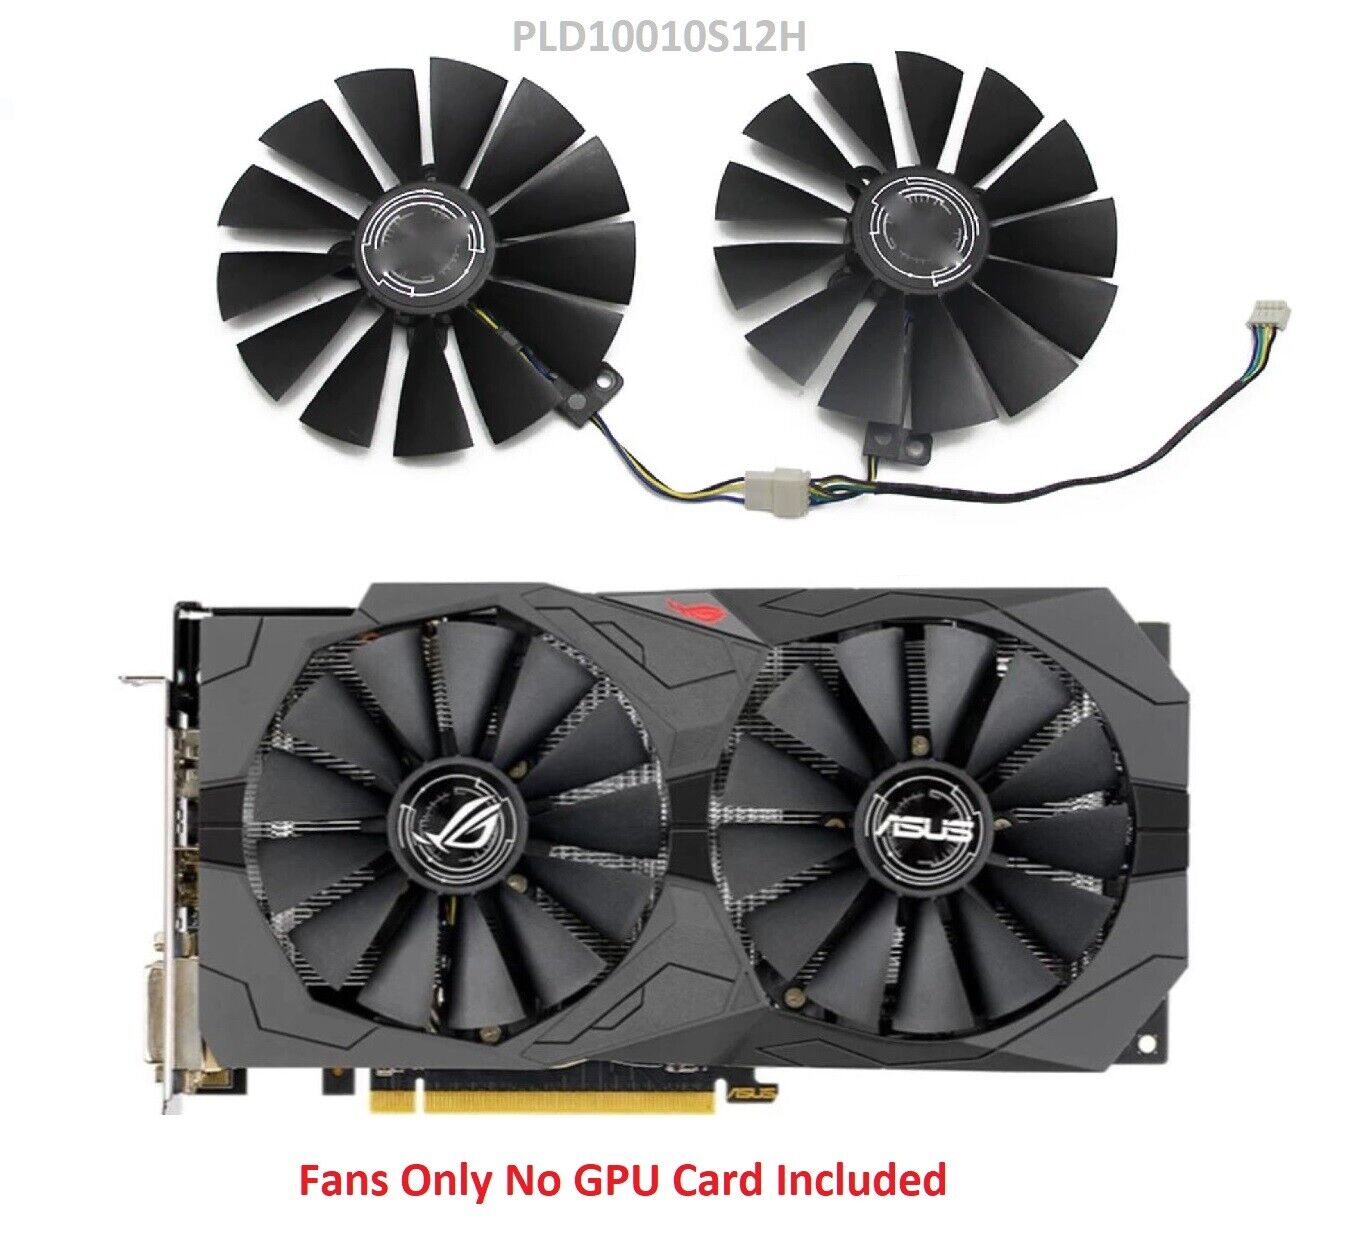 95MM PLD10010S12H Cooler Fan For ASUS ROG STRIX Dual RX 470 570 AMD RX470 RX480